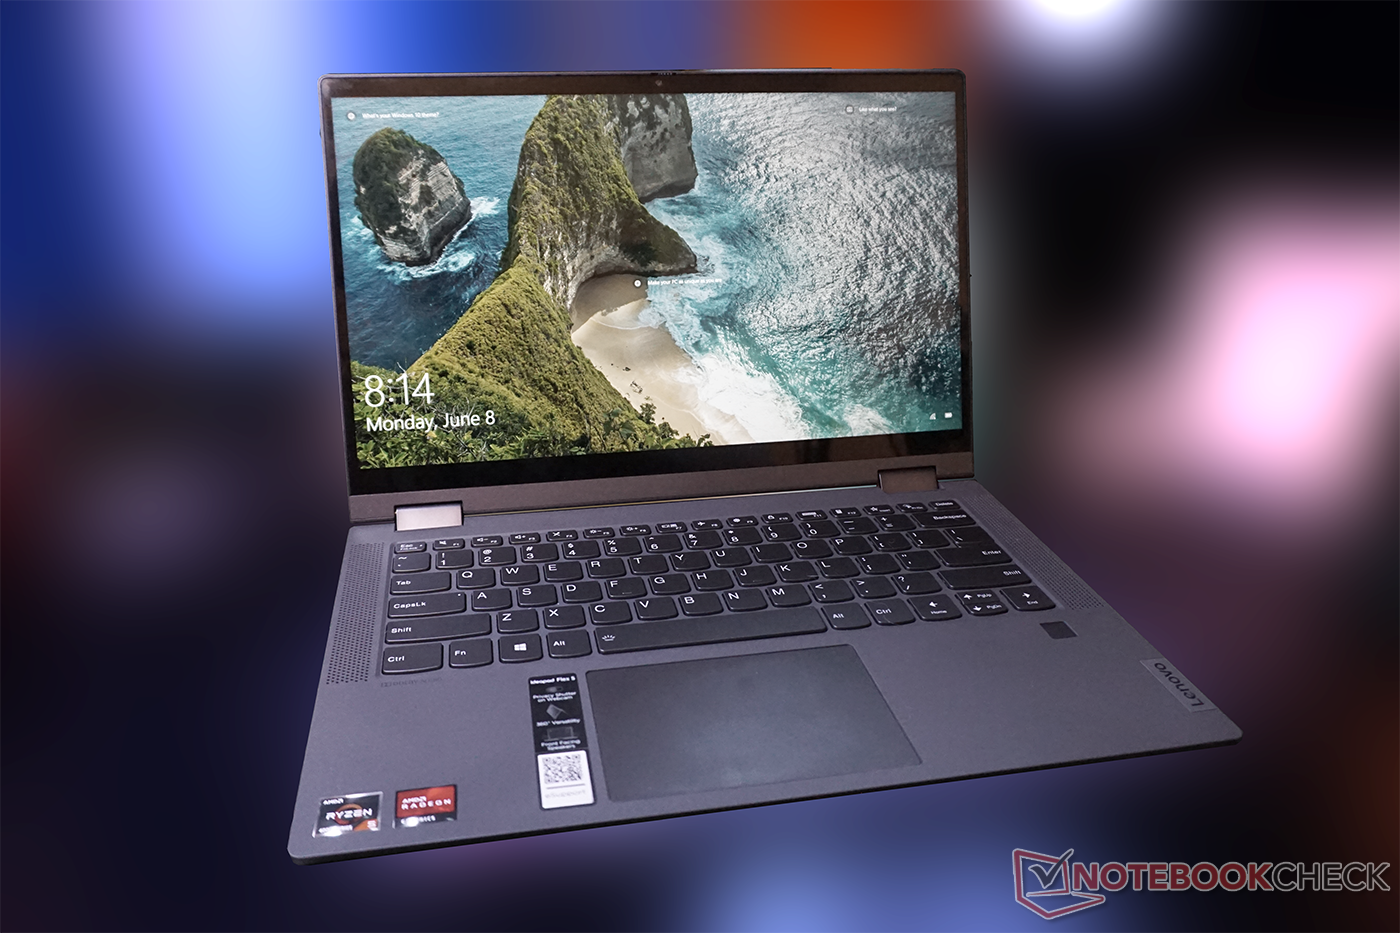 Hands-on: The Lenovo Flex 5 promises Ice Lake-shattering performance at an affordable price